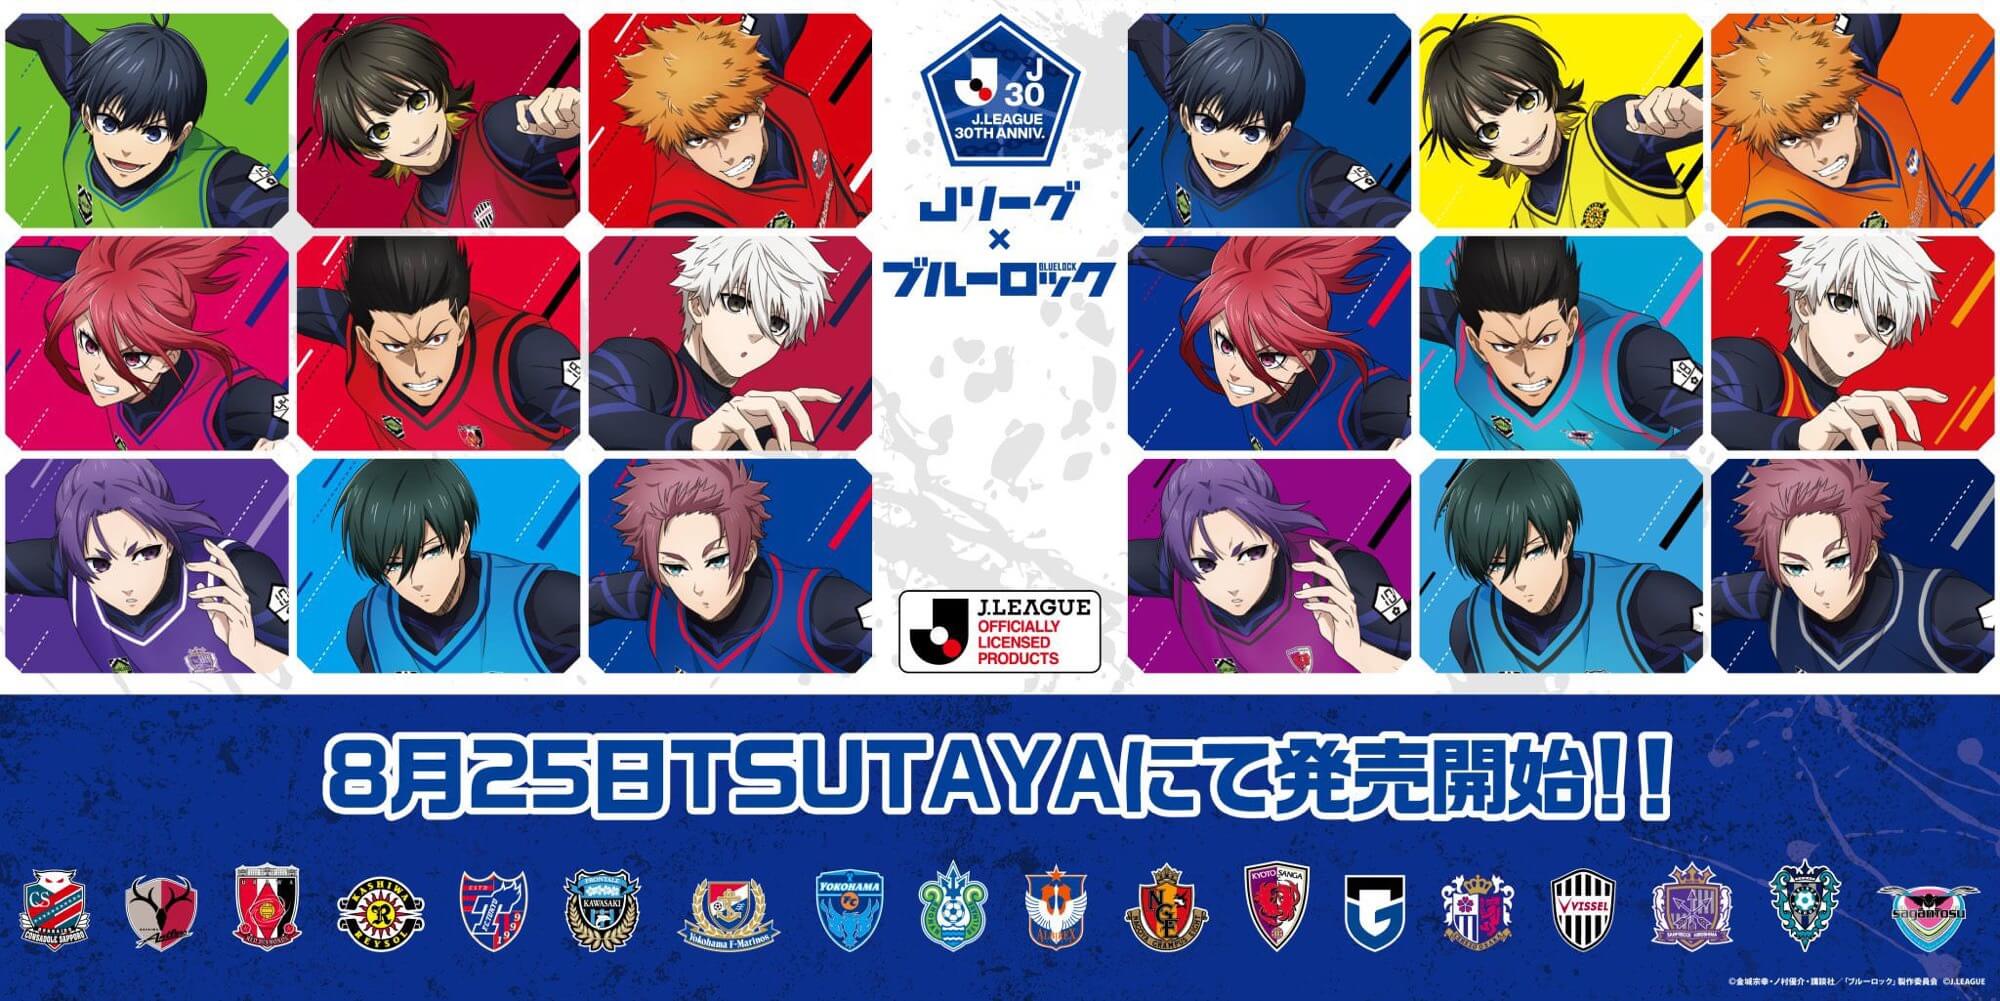 J.League 30th Anniversary Collaboration with TV Anime Blue Lock